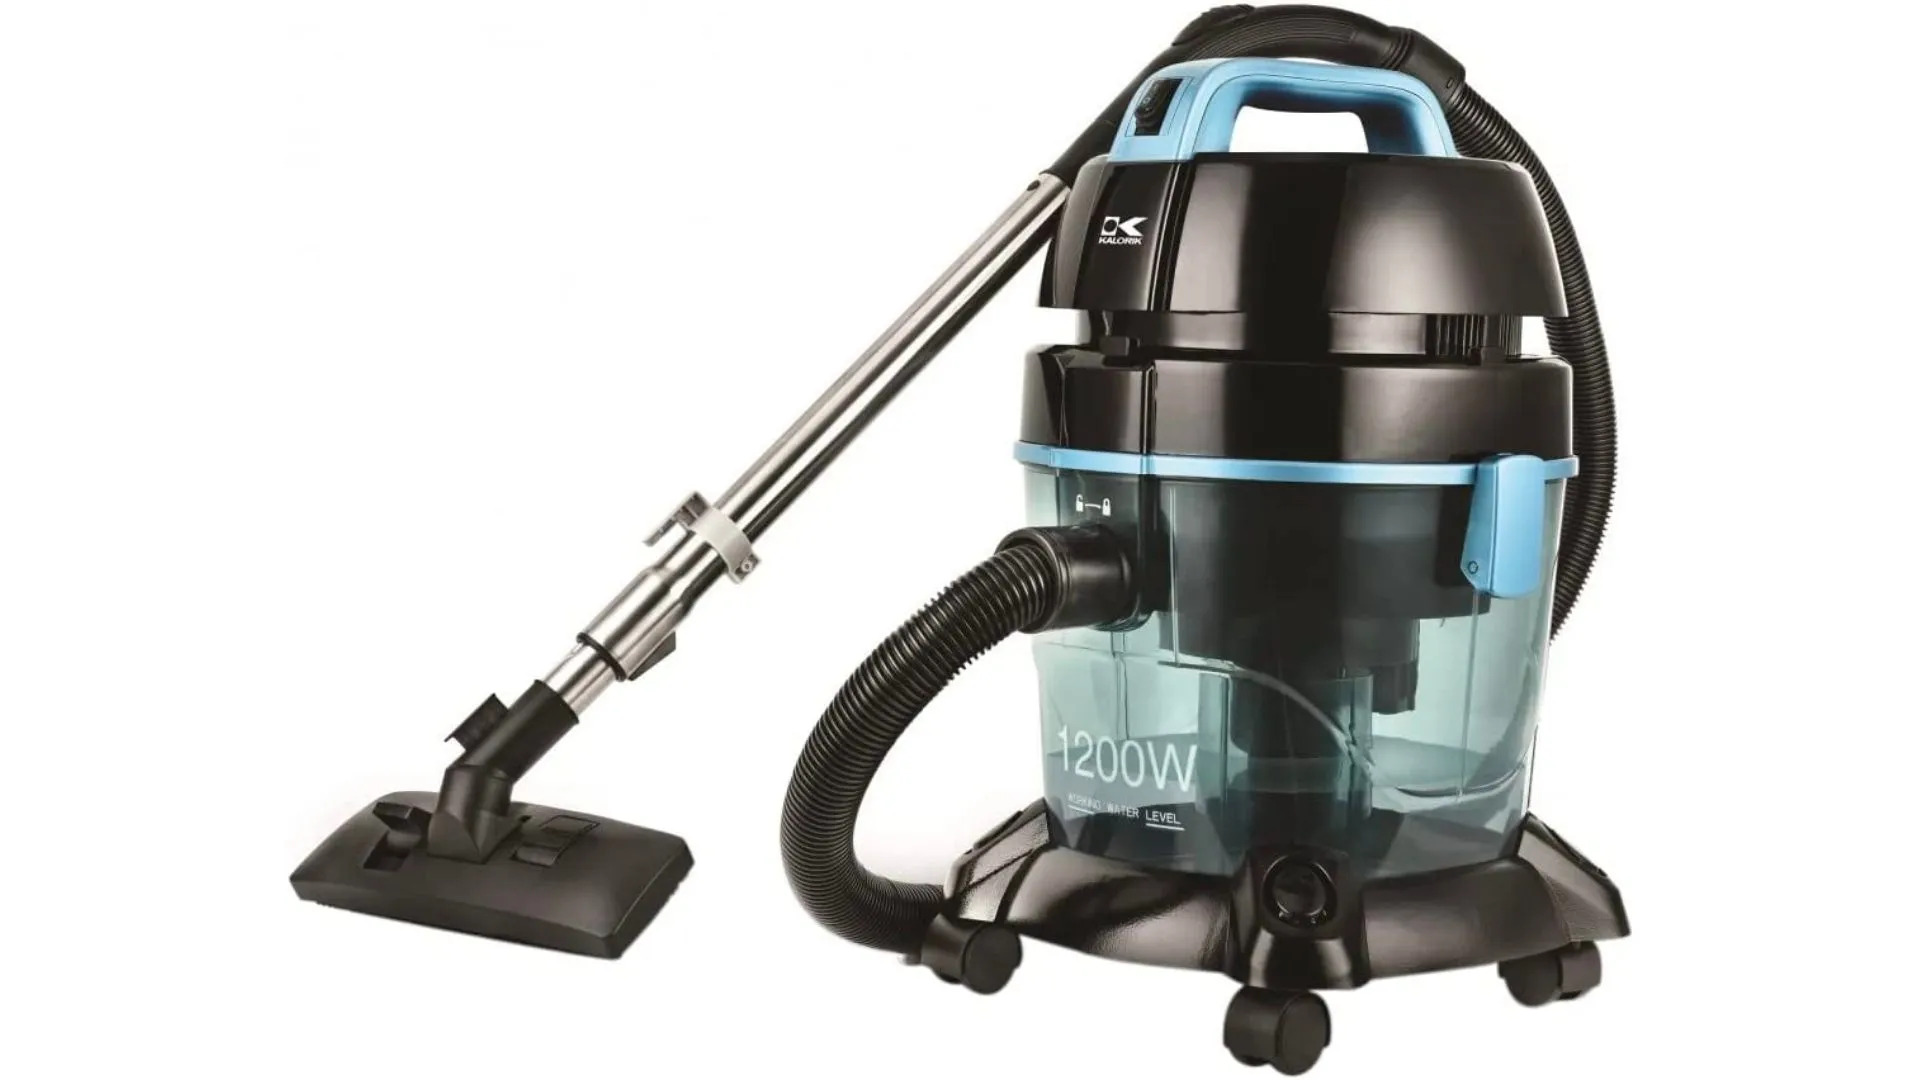 Water Filter Vacuum Cleaner: How It Works